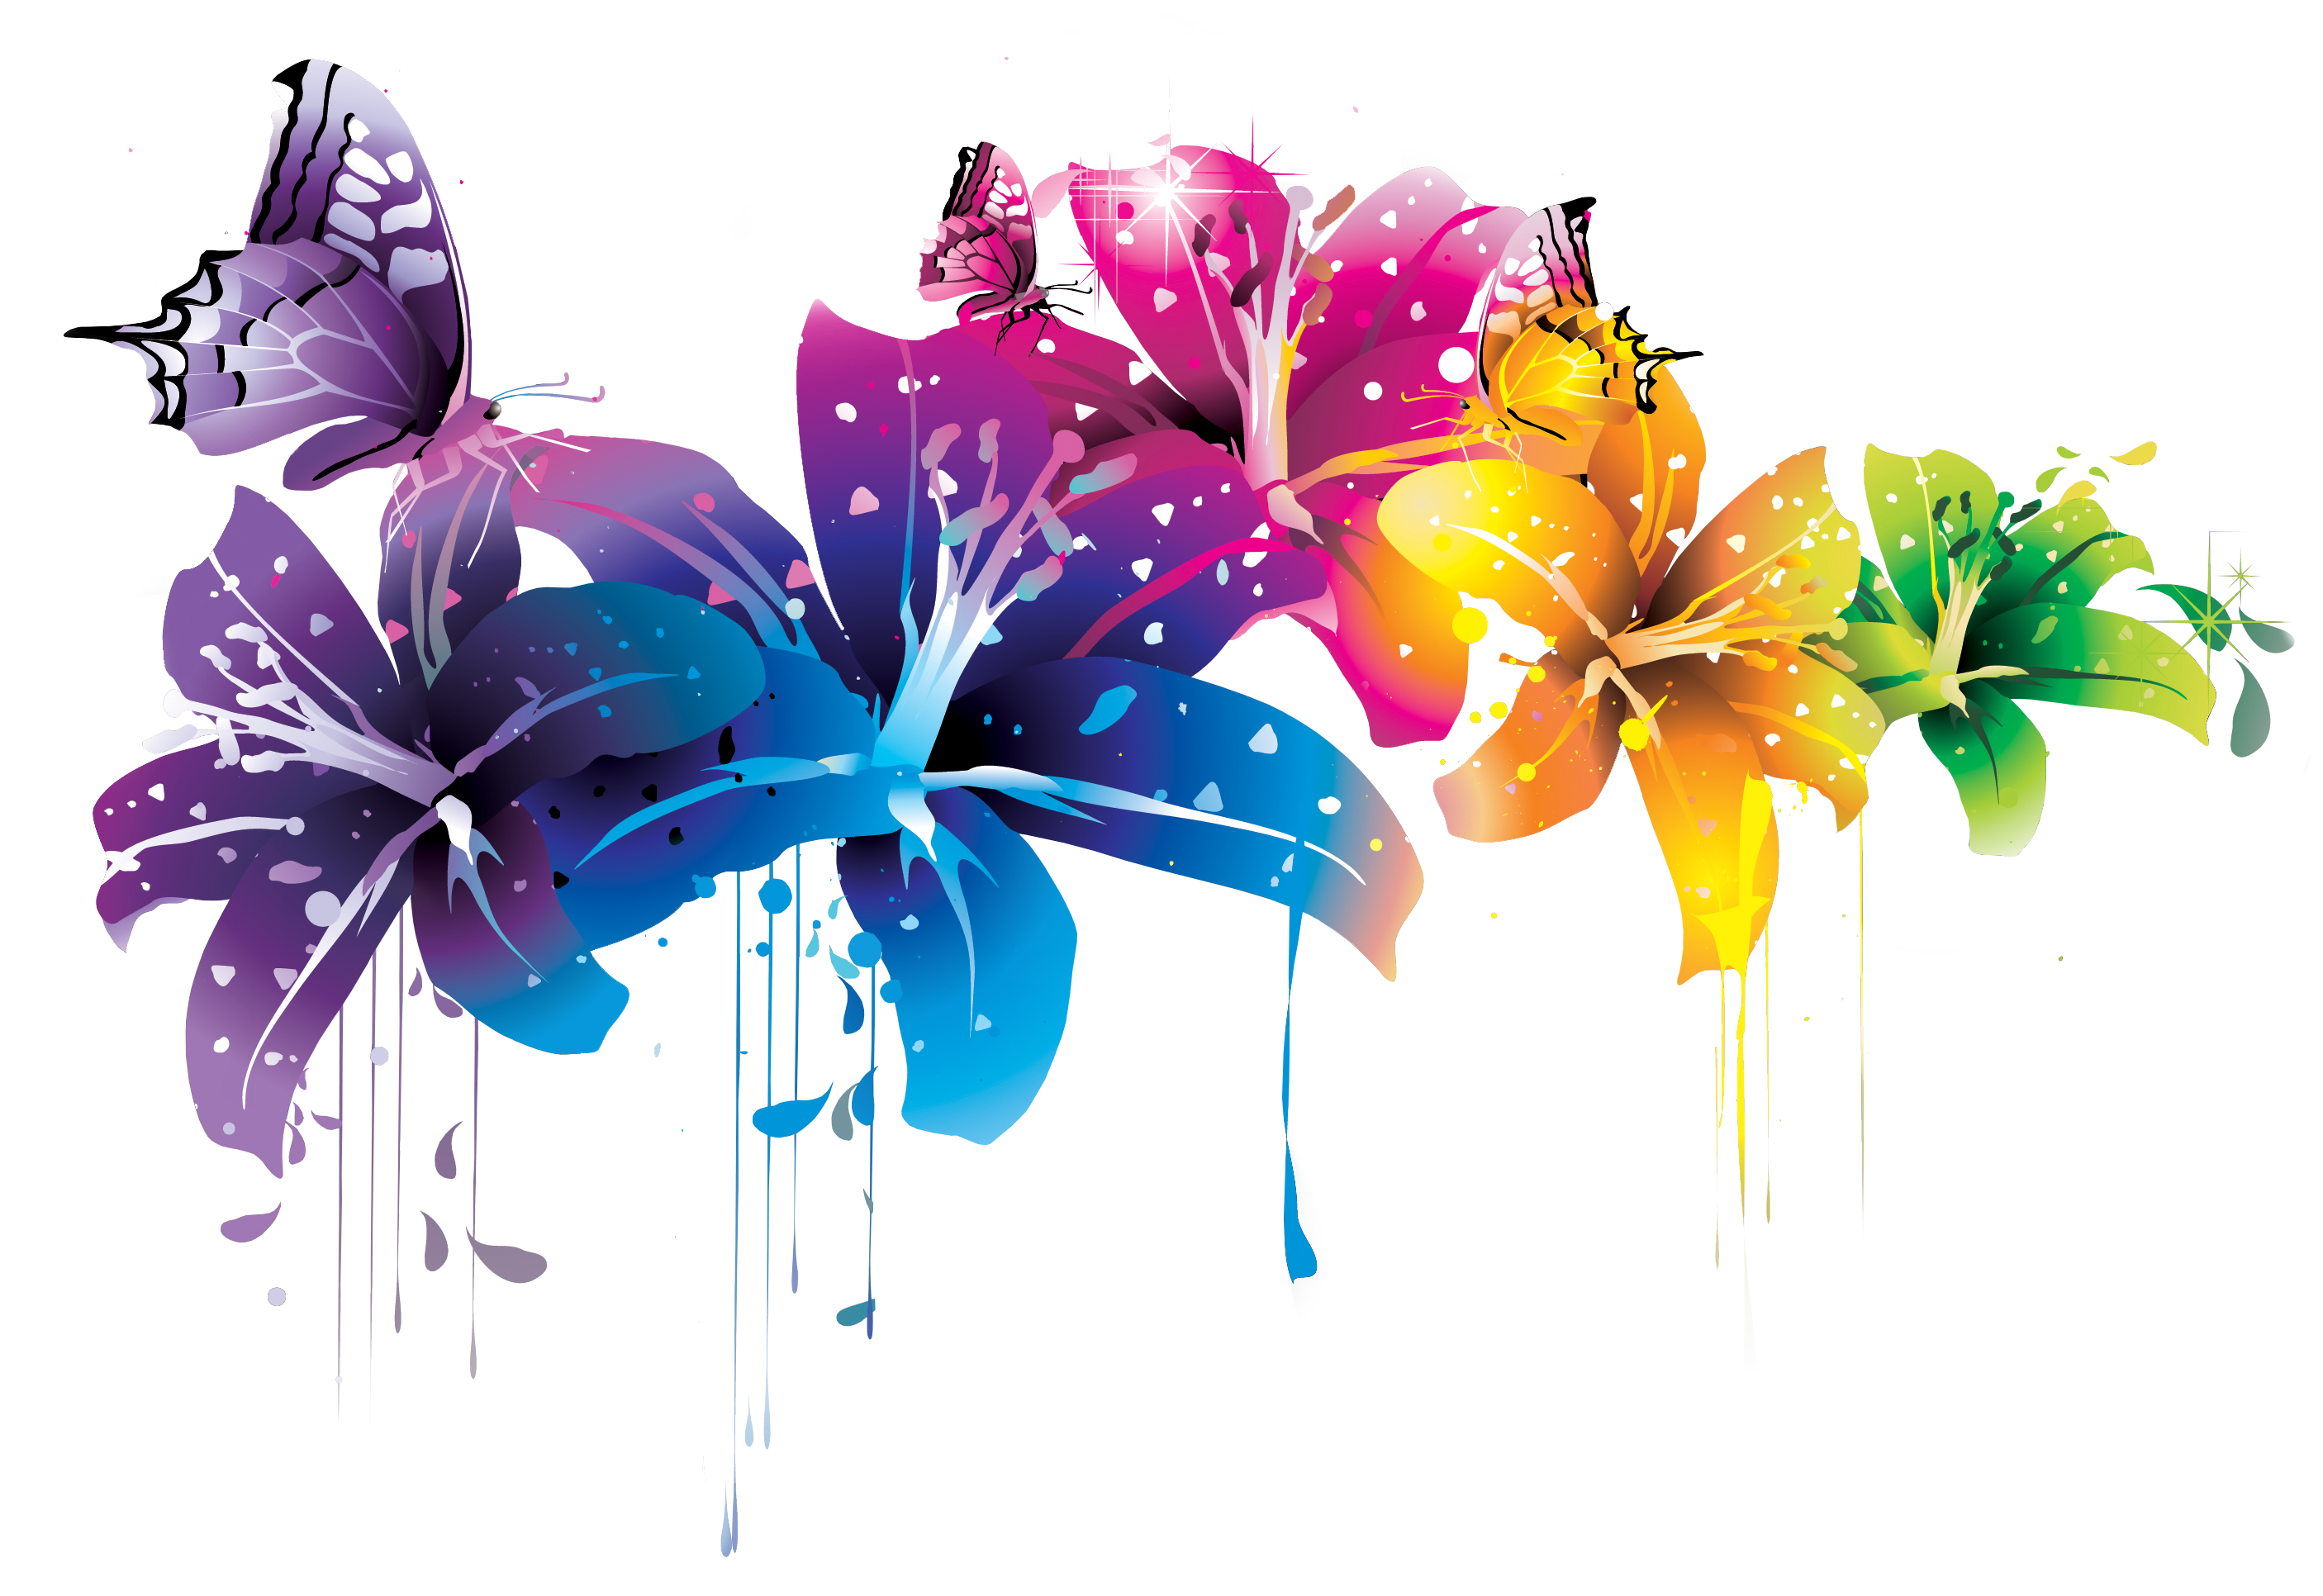 Free Flower Vector Png, Download Free Flower Vector Png png images